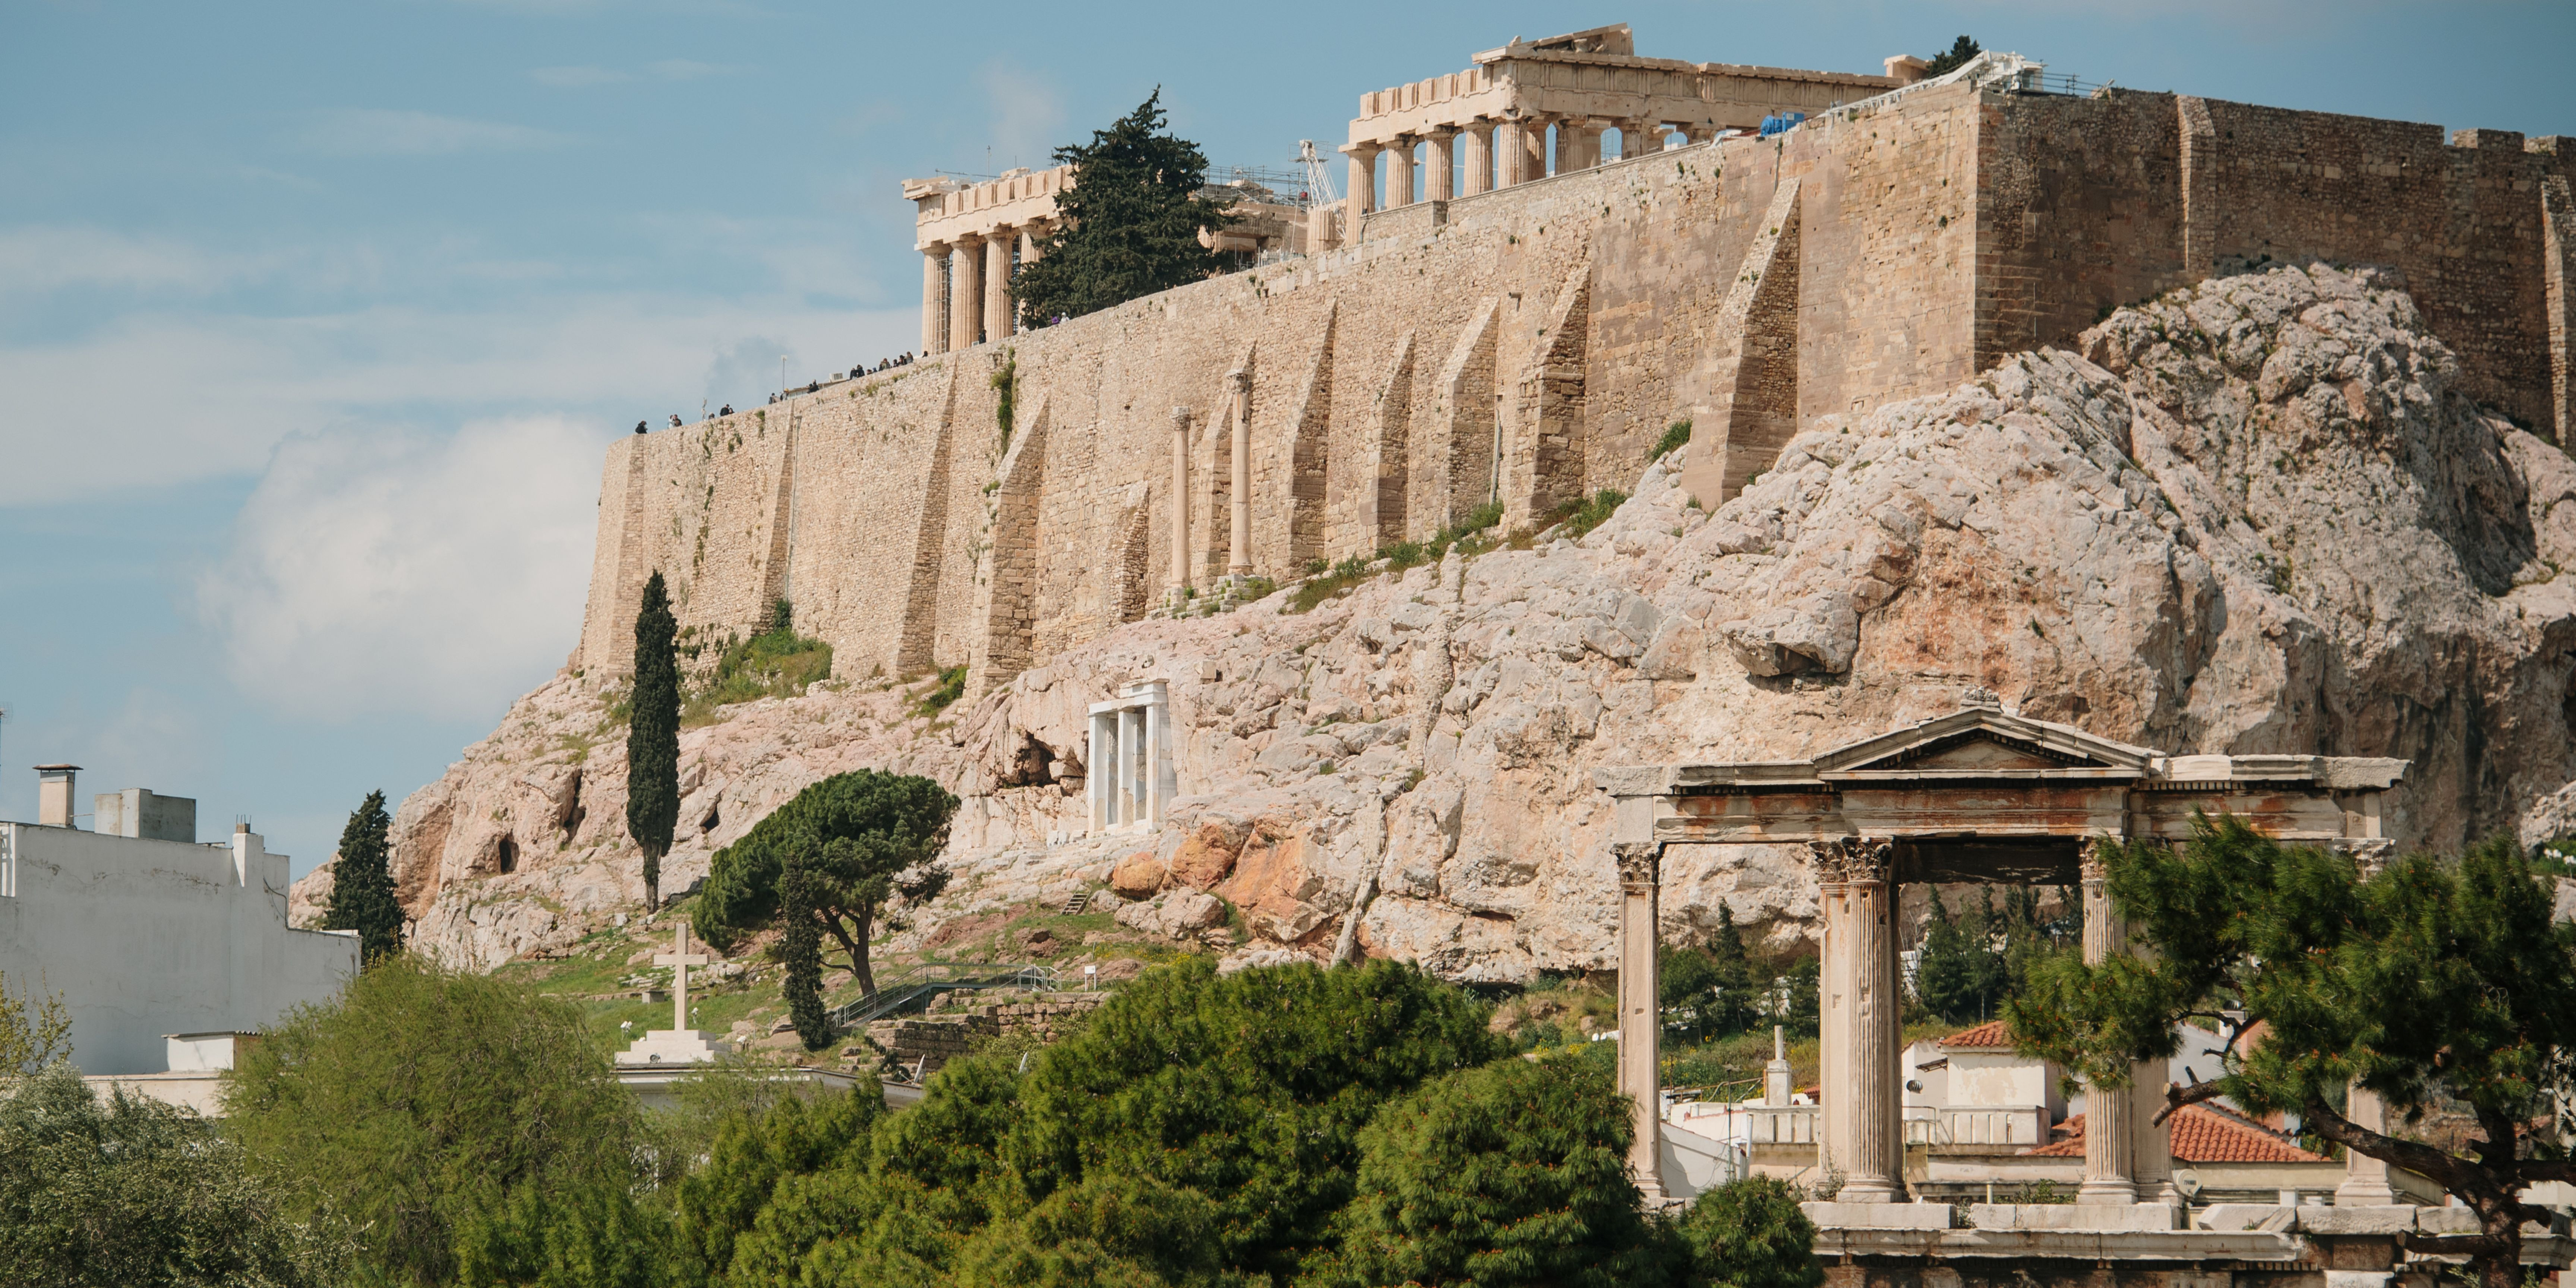 A view of the Acropolis in Athens, showcasing ancient structures and surrounding greenery.